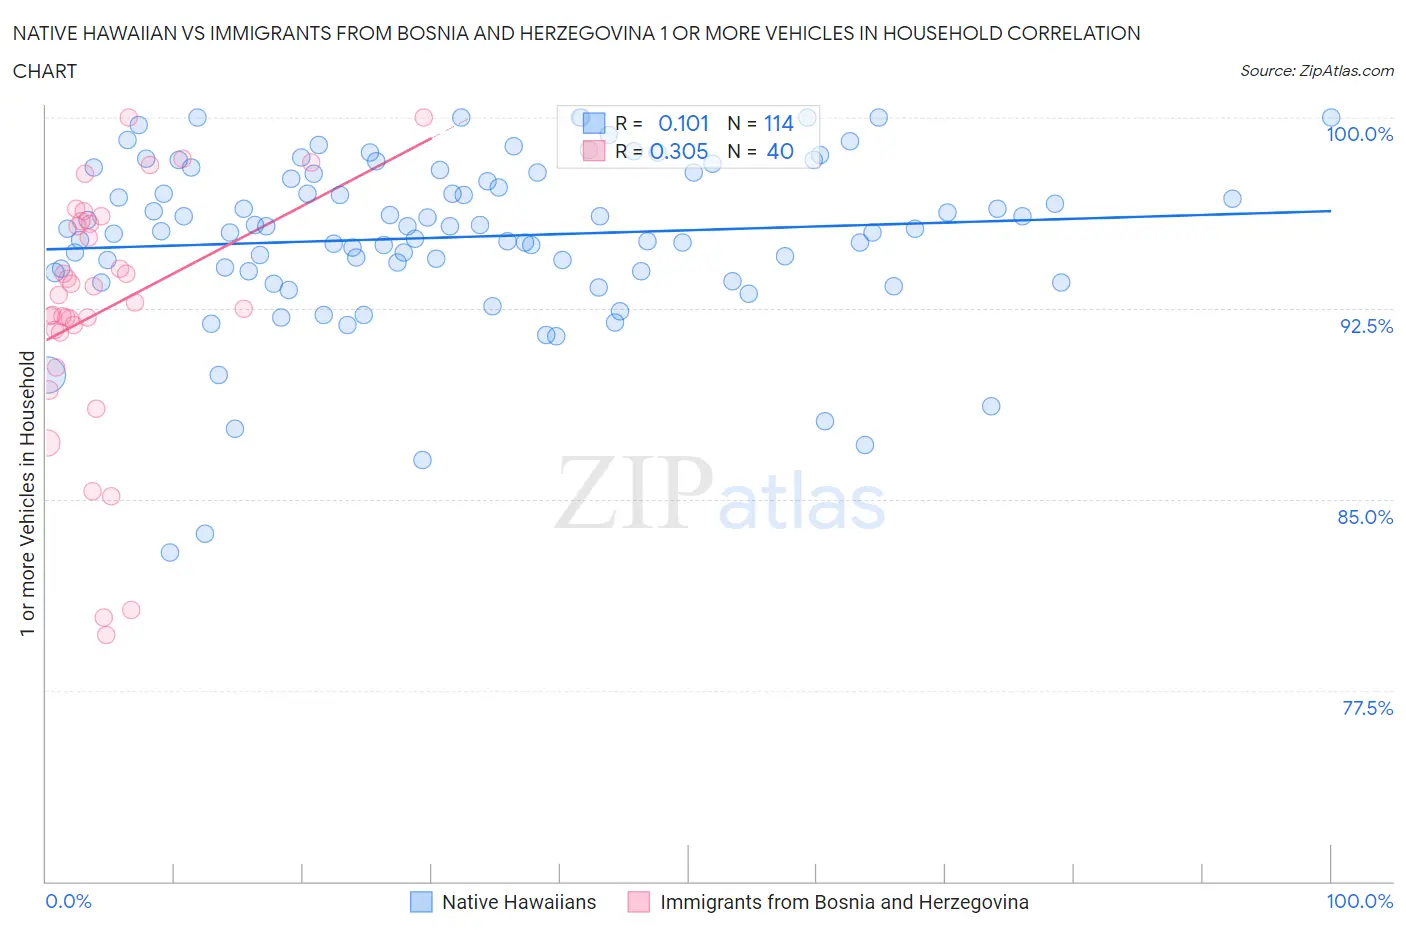 Native Hawaiian vs Immigrants from Bosnia and Herzegovina 1 or more Vehicles in Household